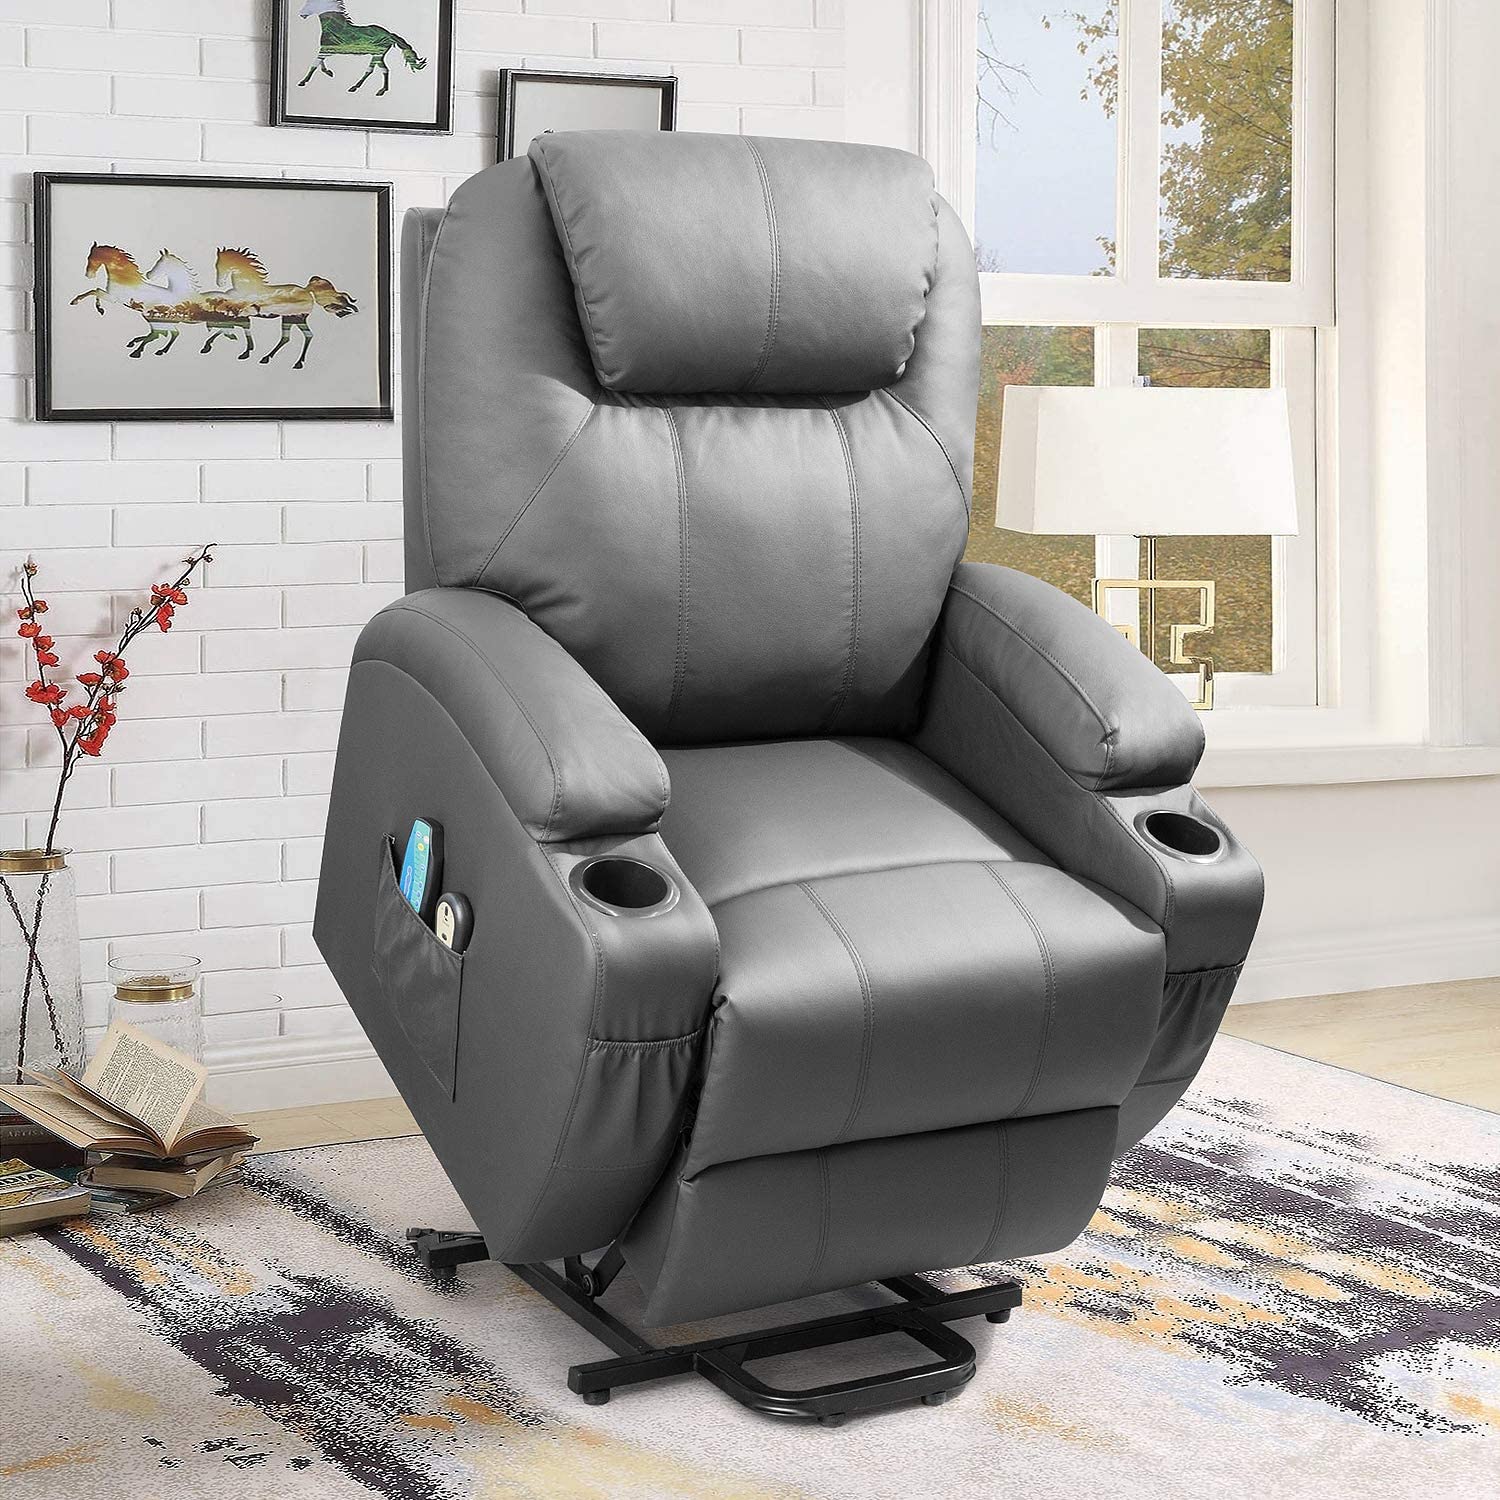 Vineego Electric Reclining Chair with Massage and Heating,Faux Leather,Gray - image 2 of 5